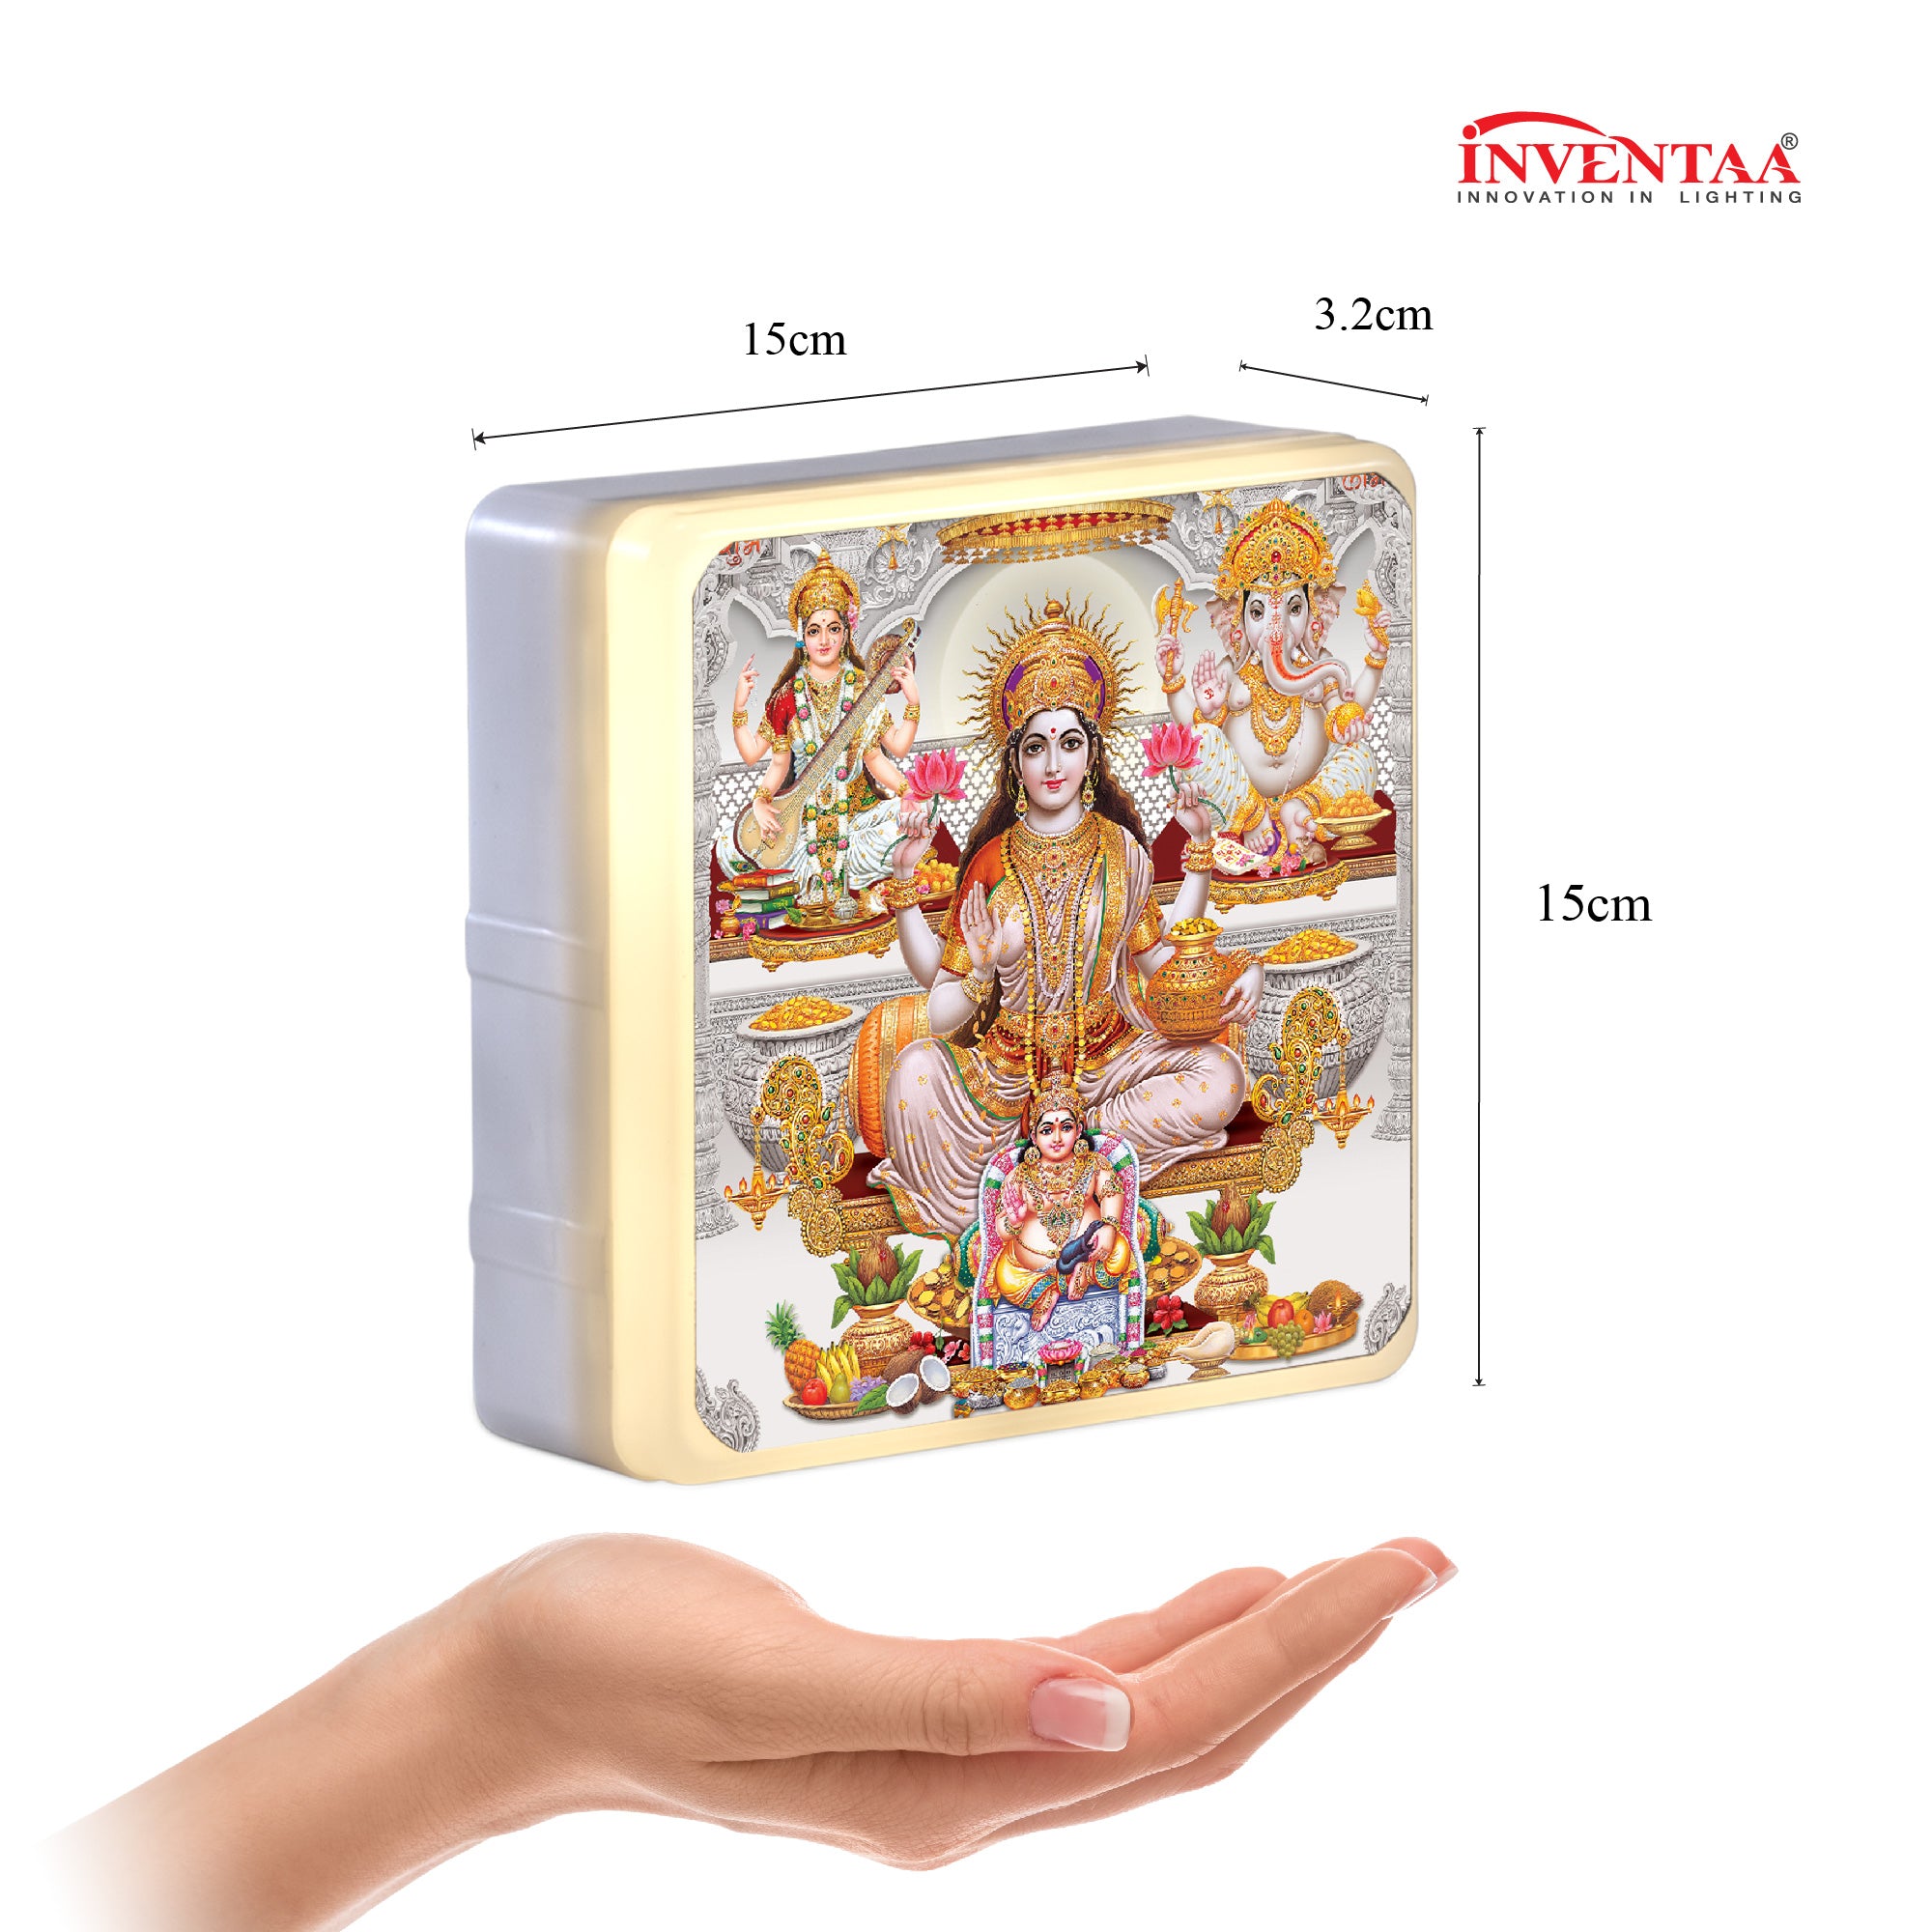 Godess Saraswathi Divine LED Outdoor Wall Light For Pooja Room_With 2 Years Replacement Warranty